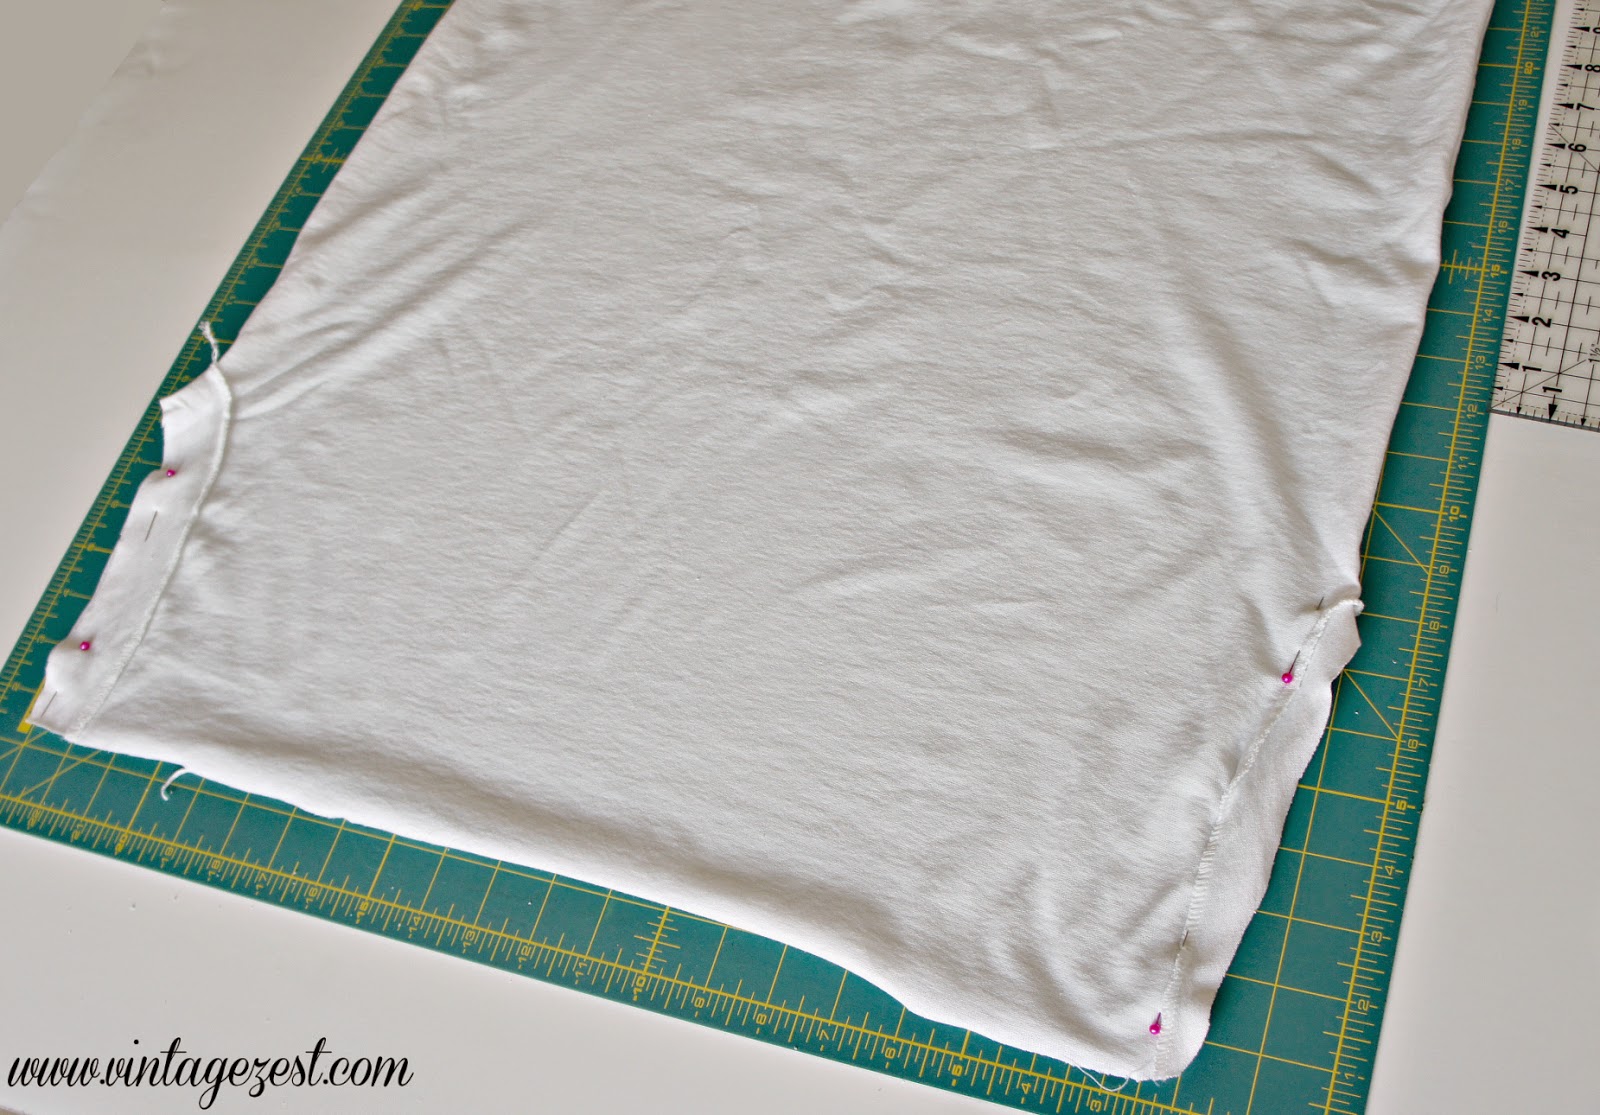 How to: DIY a Dress Upcycled from Oversized T-shirts on Diane's Vintage Zest!  #sewing #tutorial